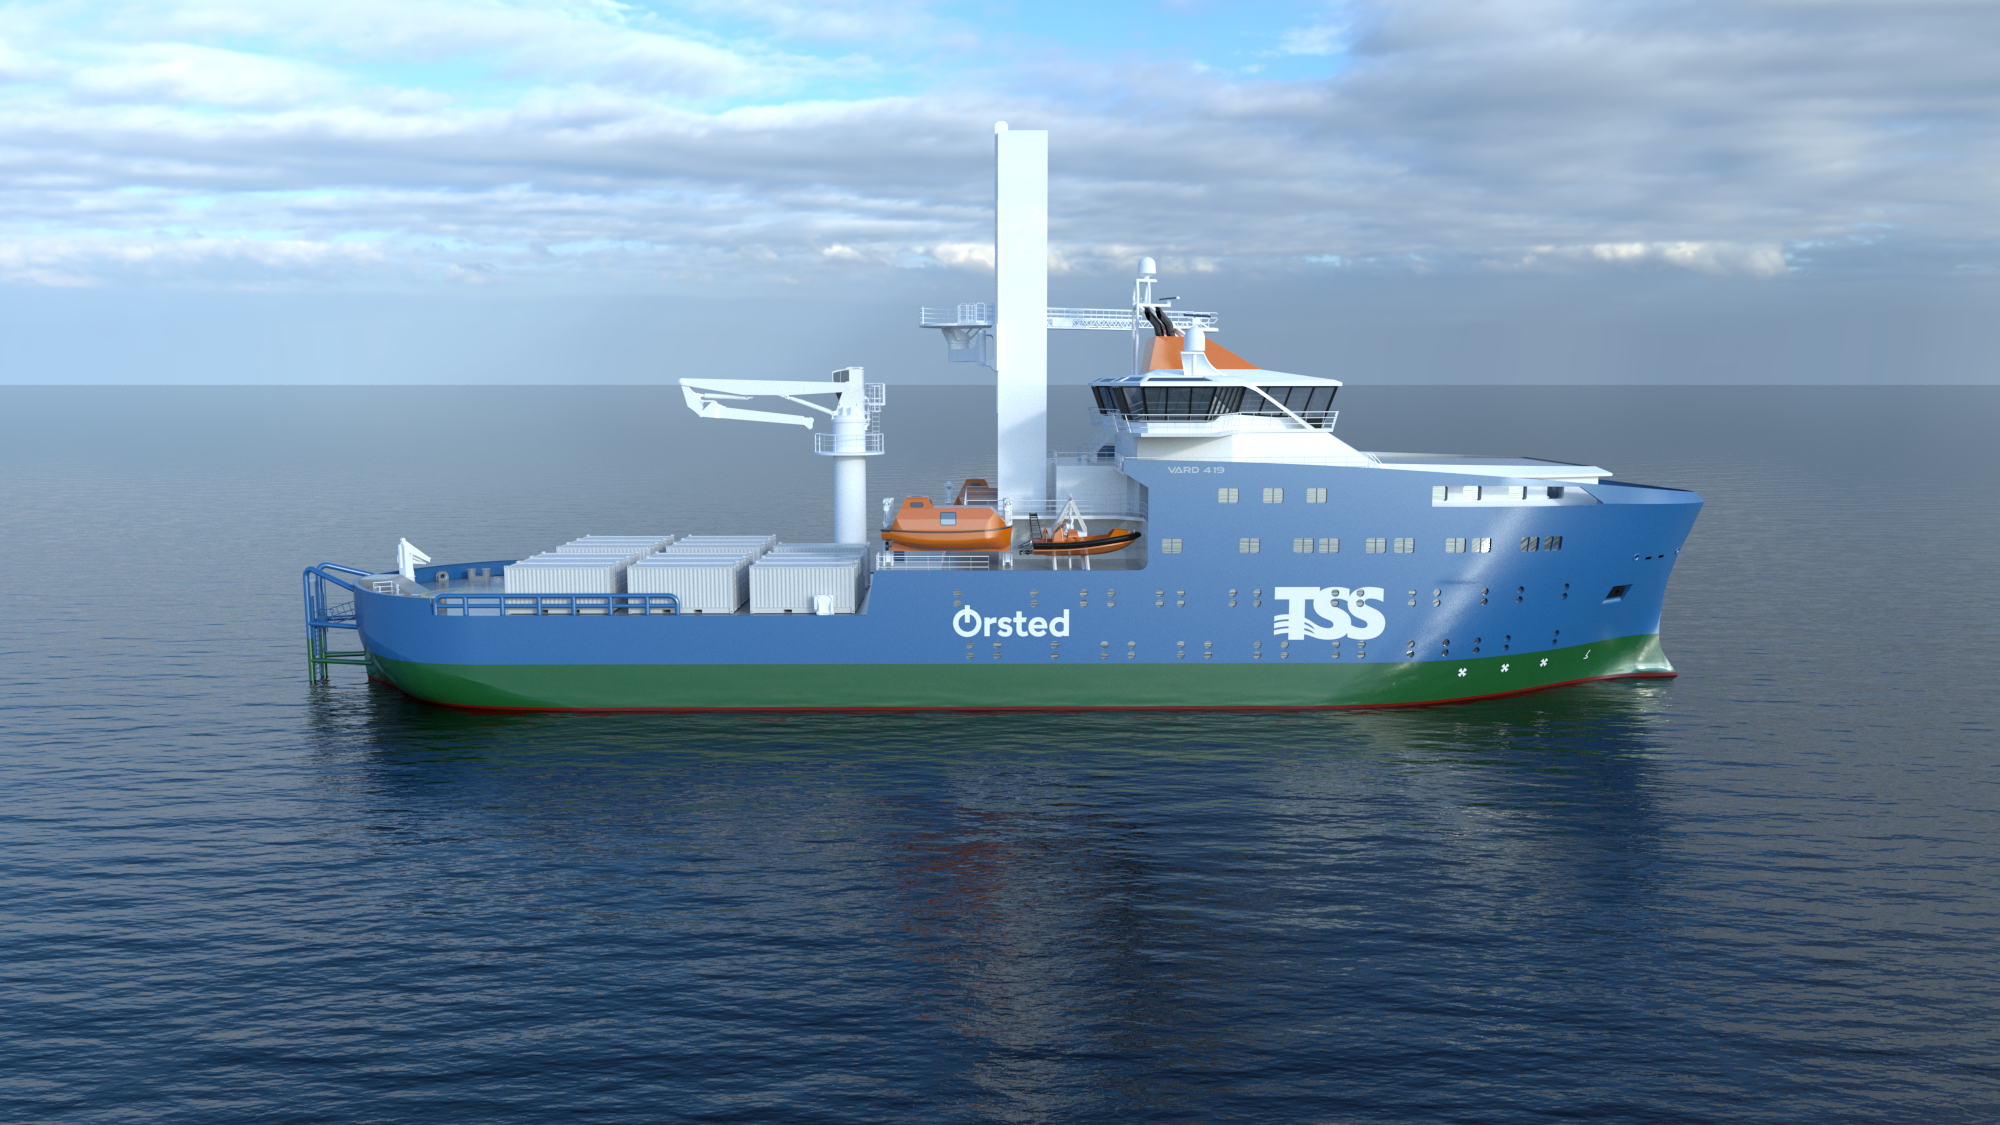 A rendering of the vessel Ørsted will use in Taiwan